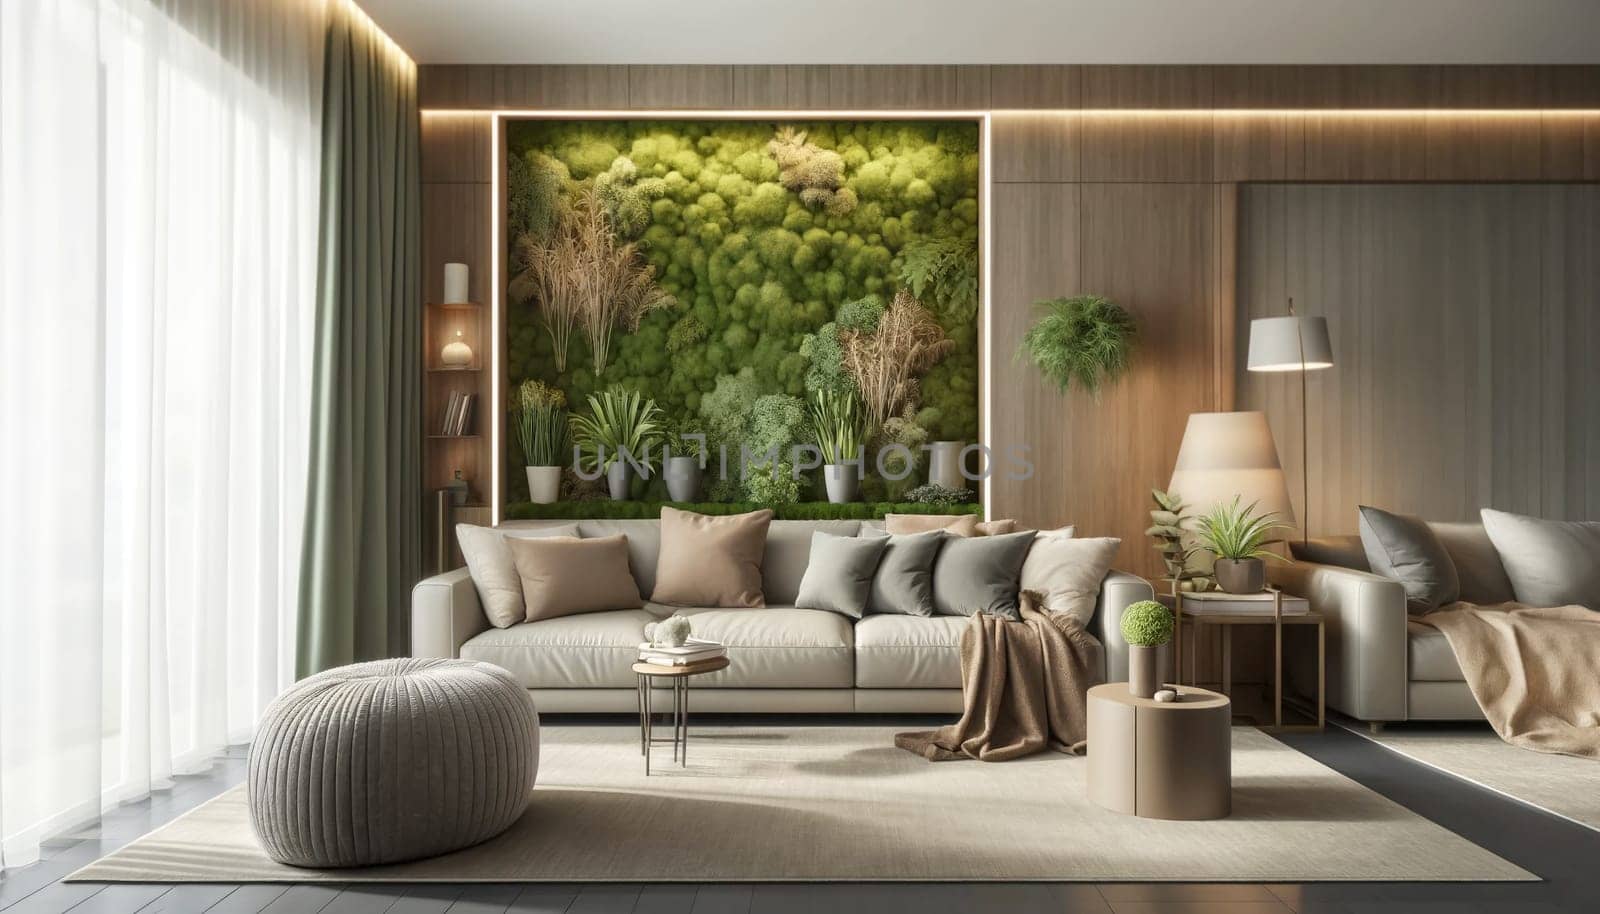 Decorative preserved forest moss on the wall in the living room interior, environmental design concept.